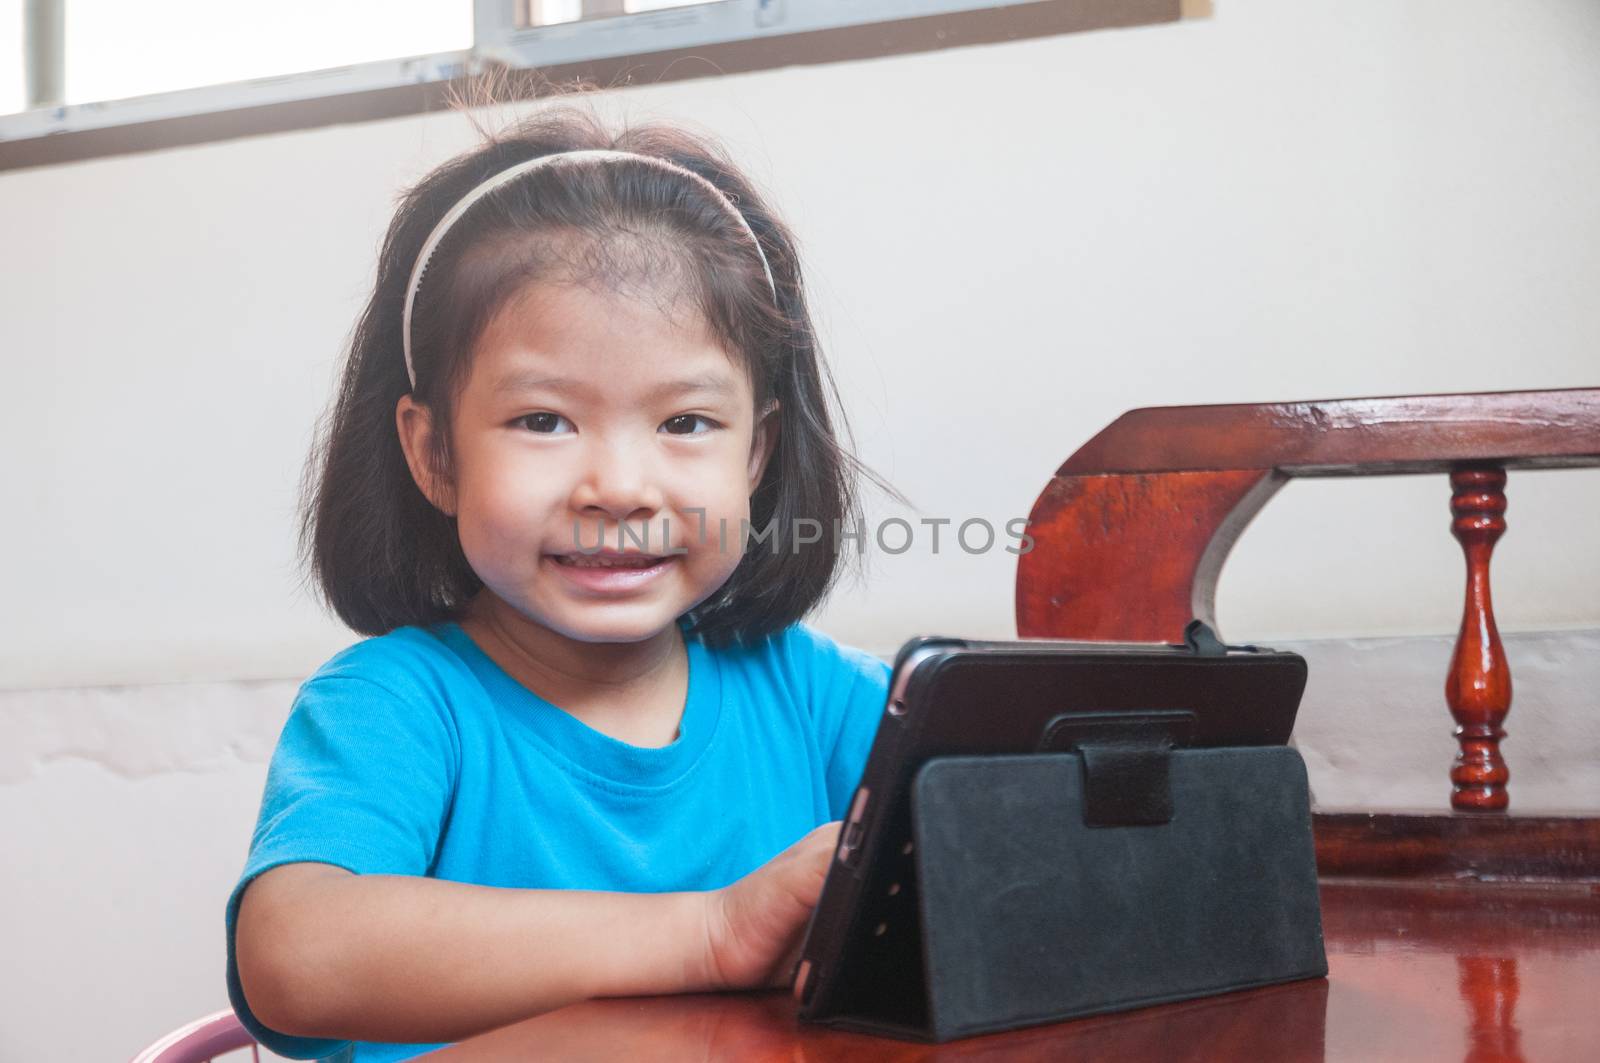 Asian Girl learning online course or playing game online on Digital Wireless Device or Tablet at home as Technology e-learning concept.